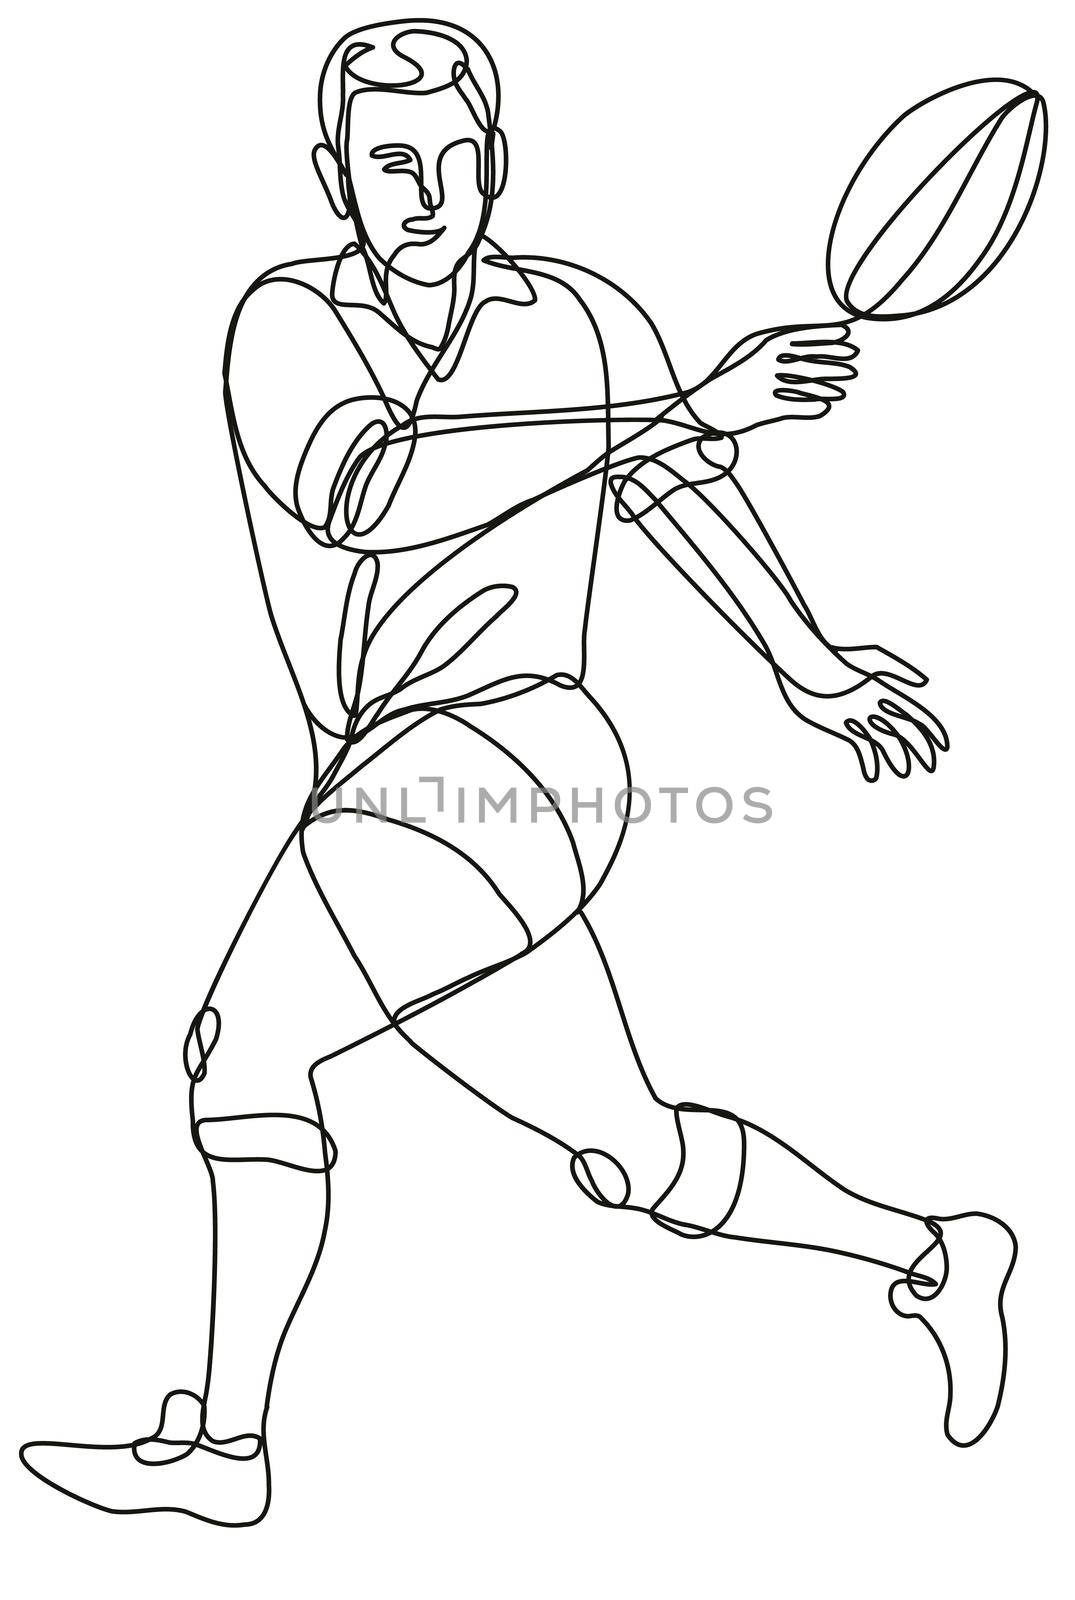 Continuous line drawing illustration of a rugby union player passing ball front view done in mono line or doodle style in black and white on isolated background. 